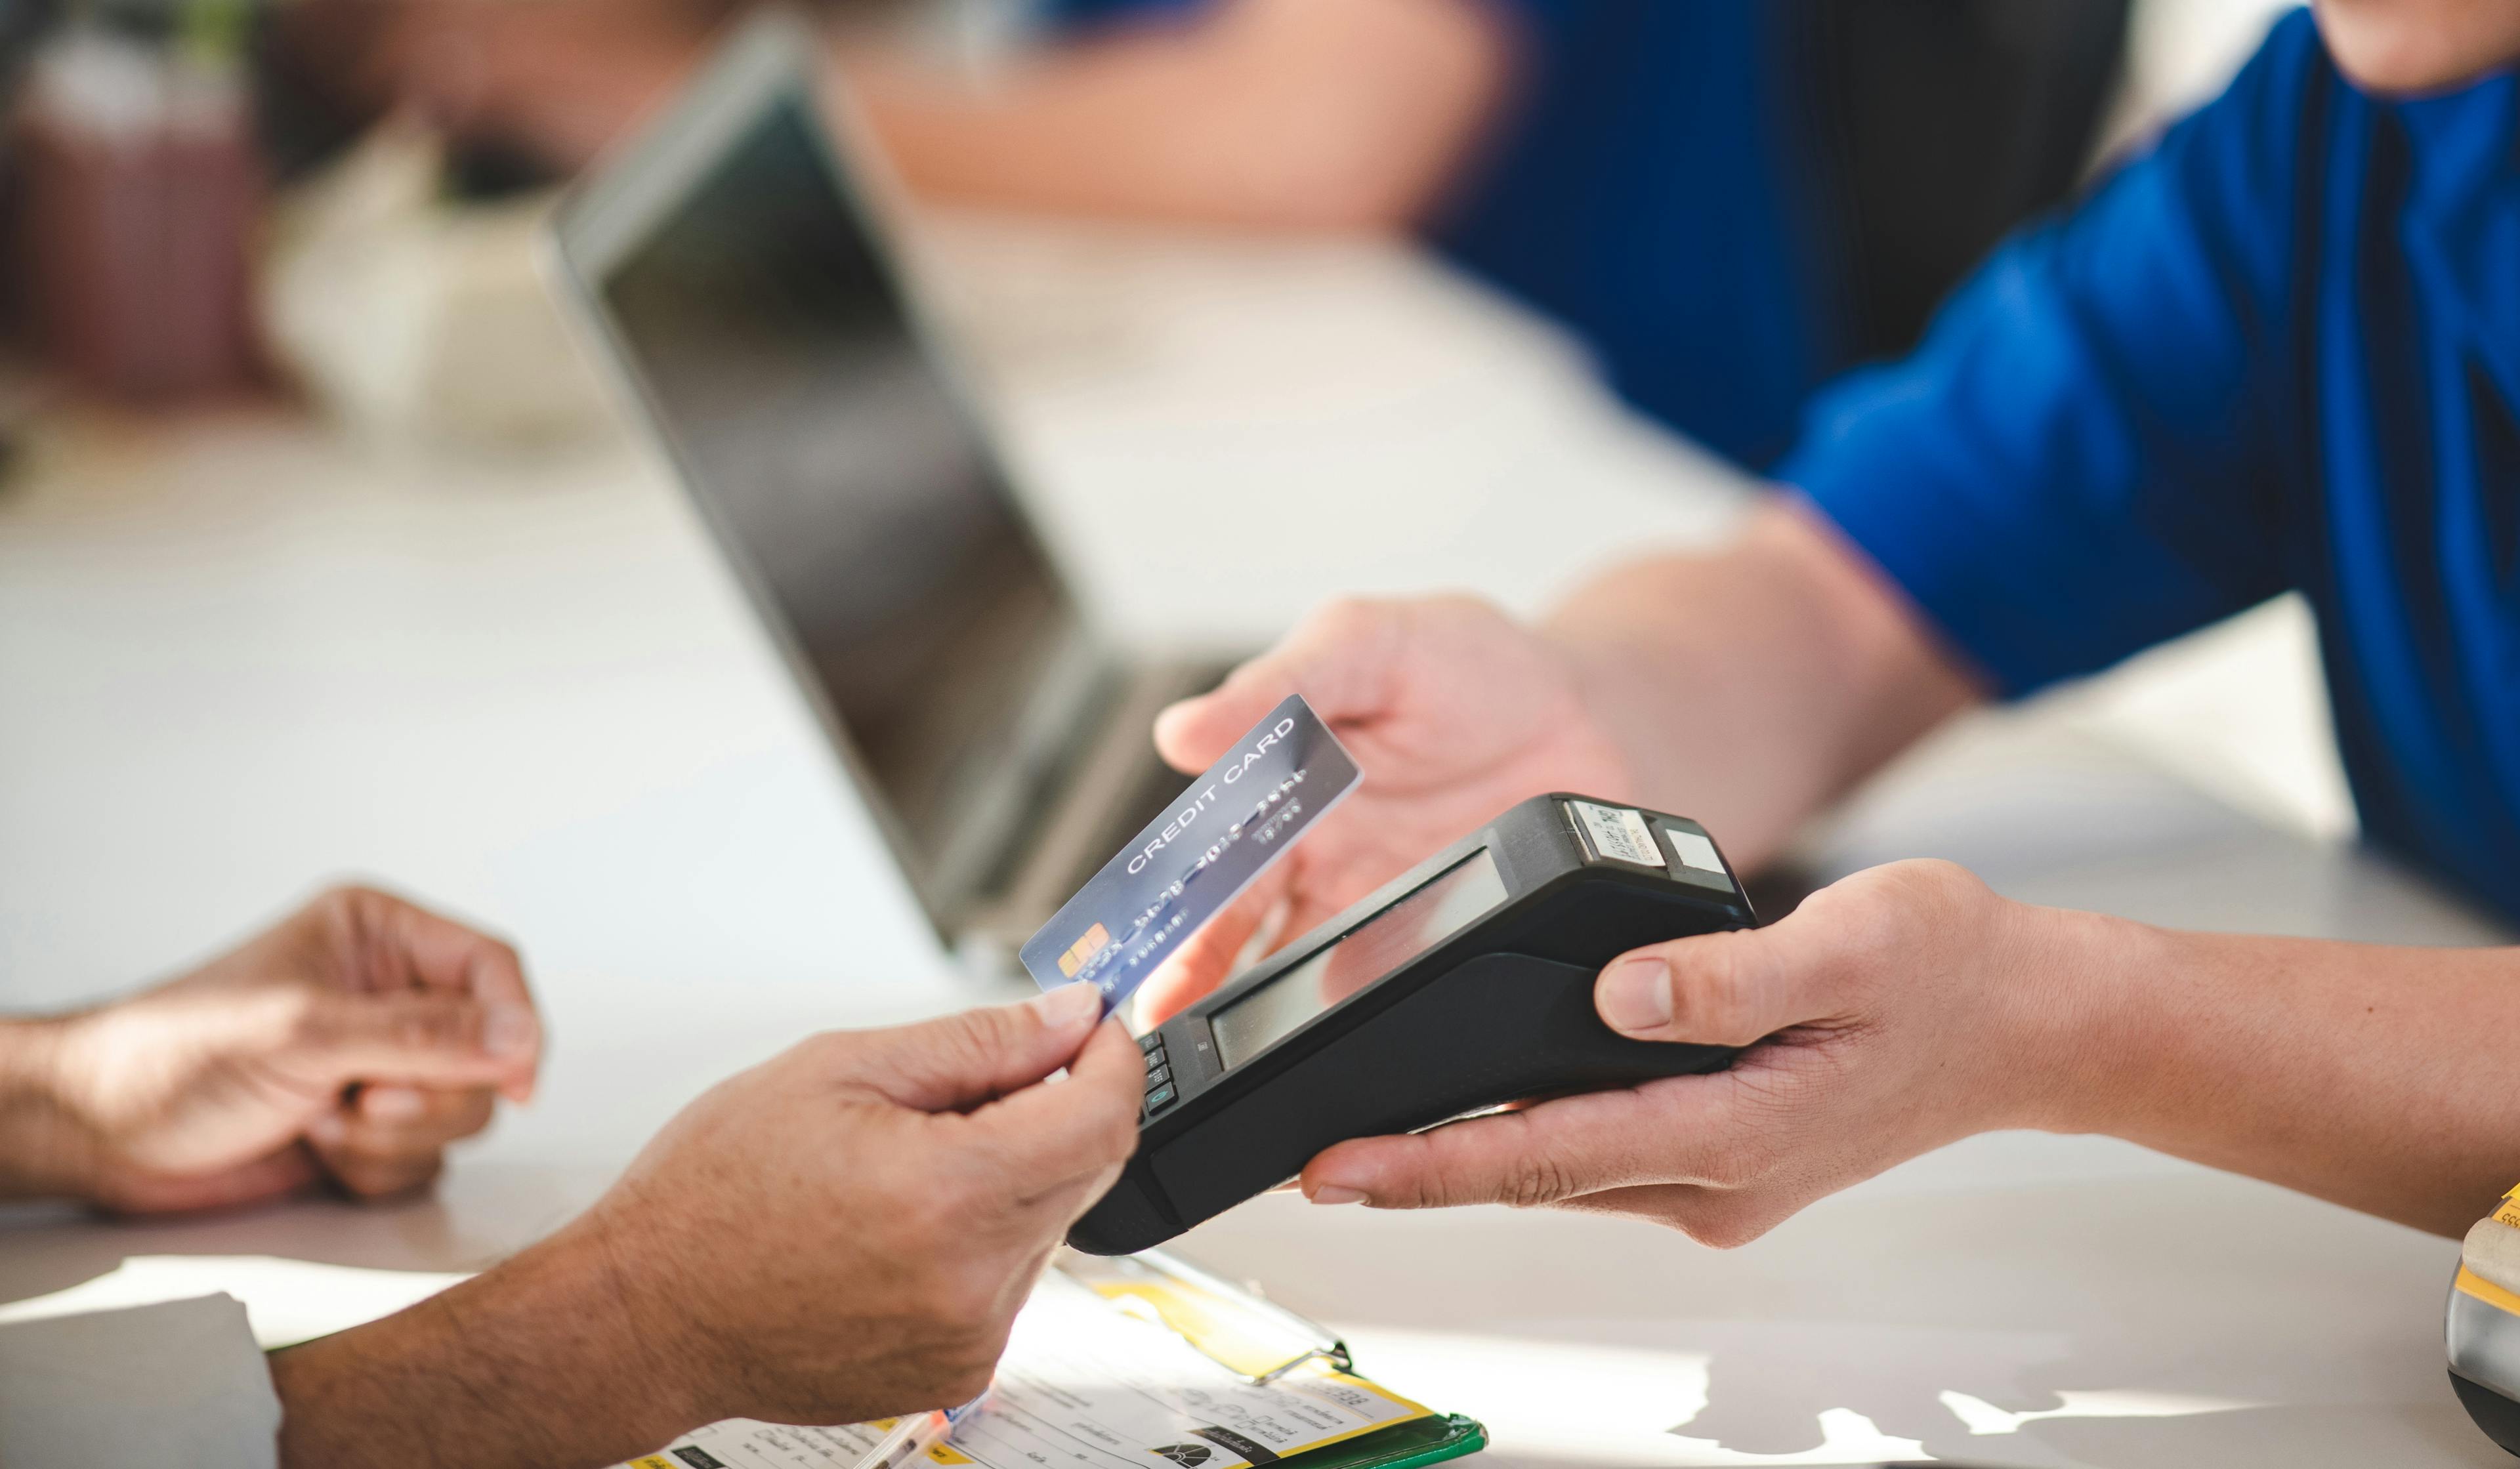 Customer paying with a credit card on an EFTPOS terminal